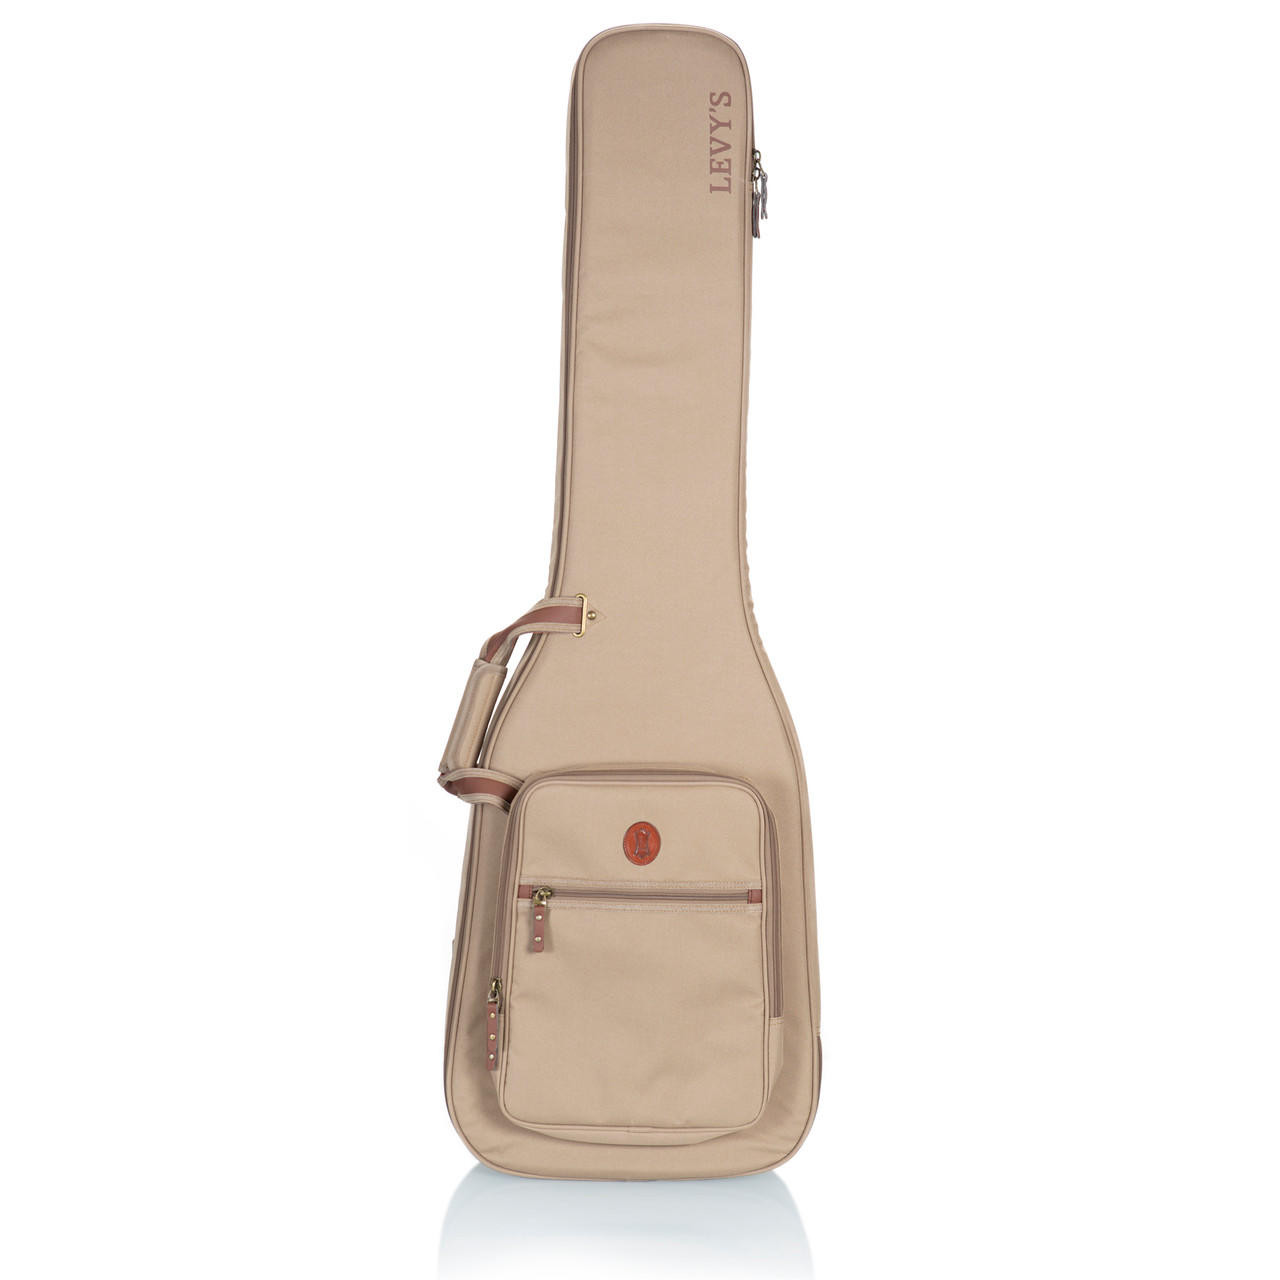 Levy's Deluxe Gig Bag for Bass Guitars - Tan | Cream City Music